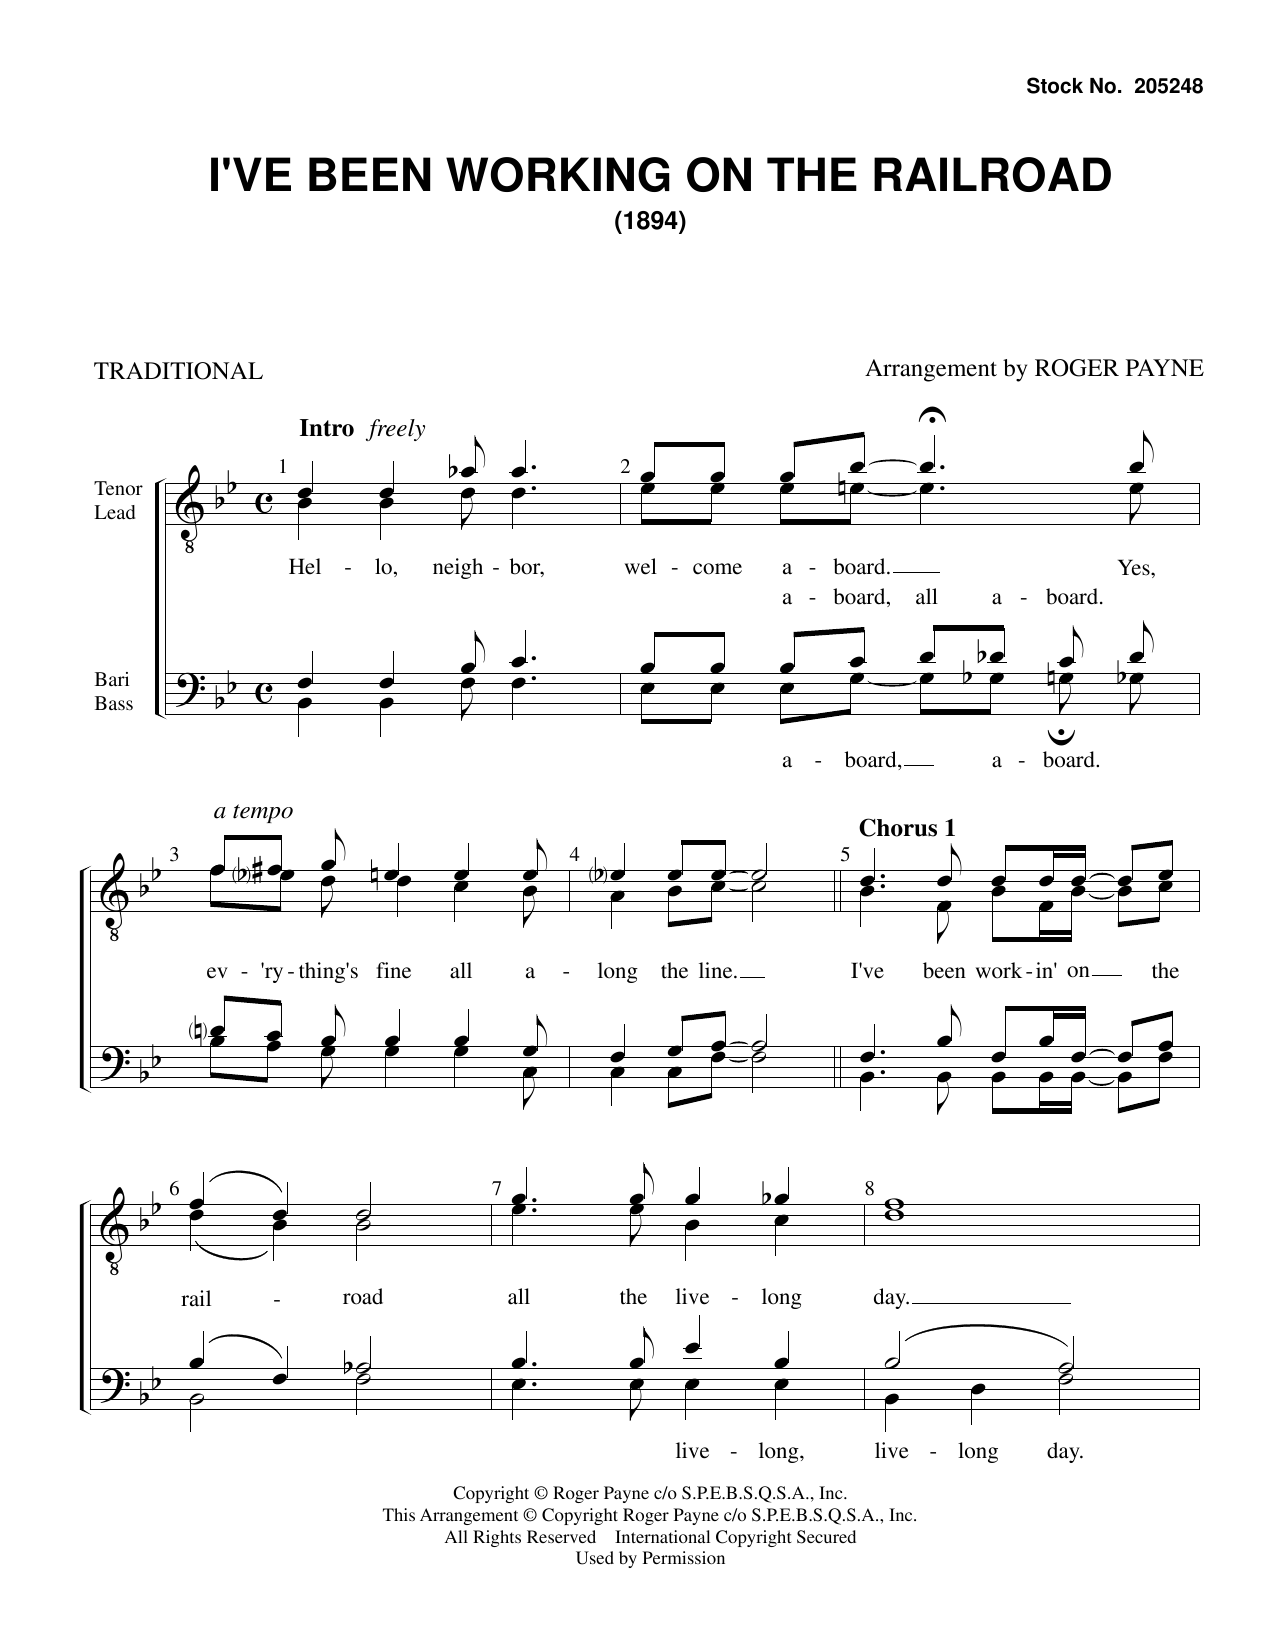 Download American Folksong I've Been Working on the Railroad (arr. Sheet Music